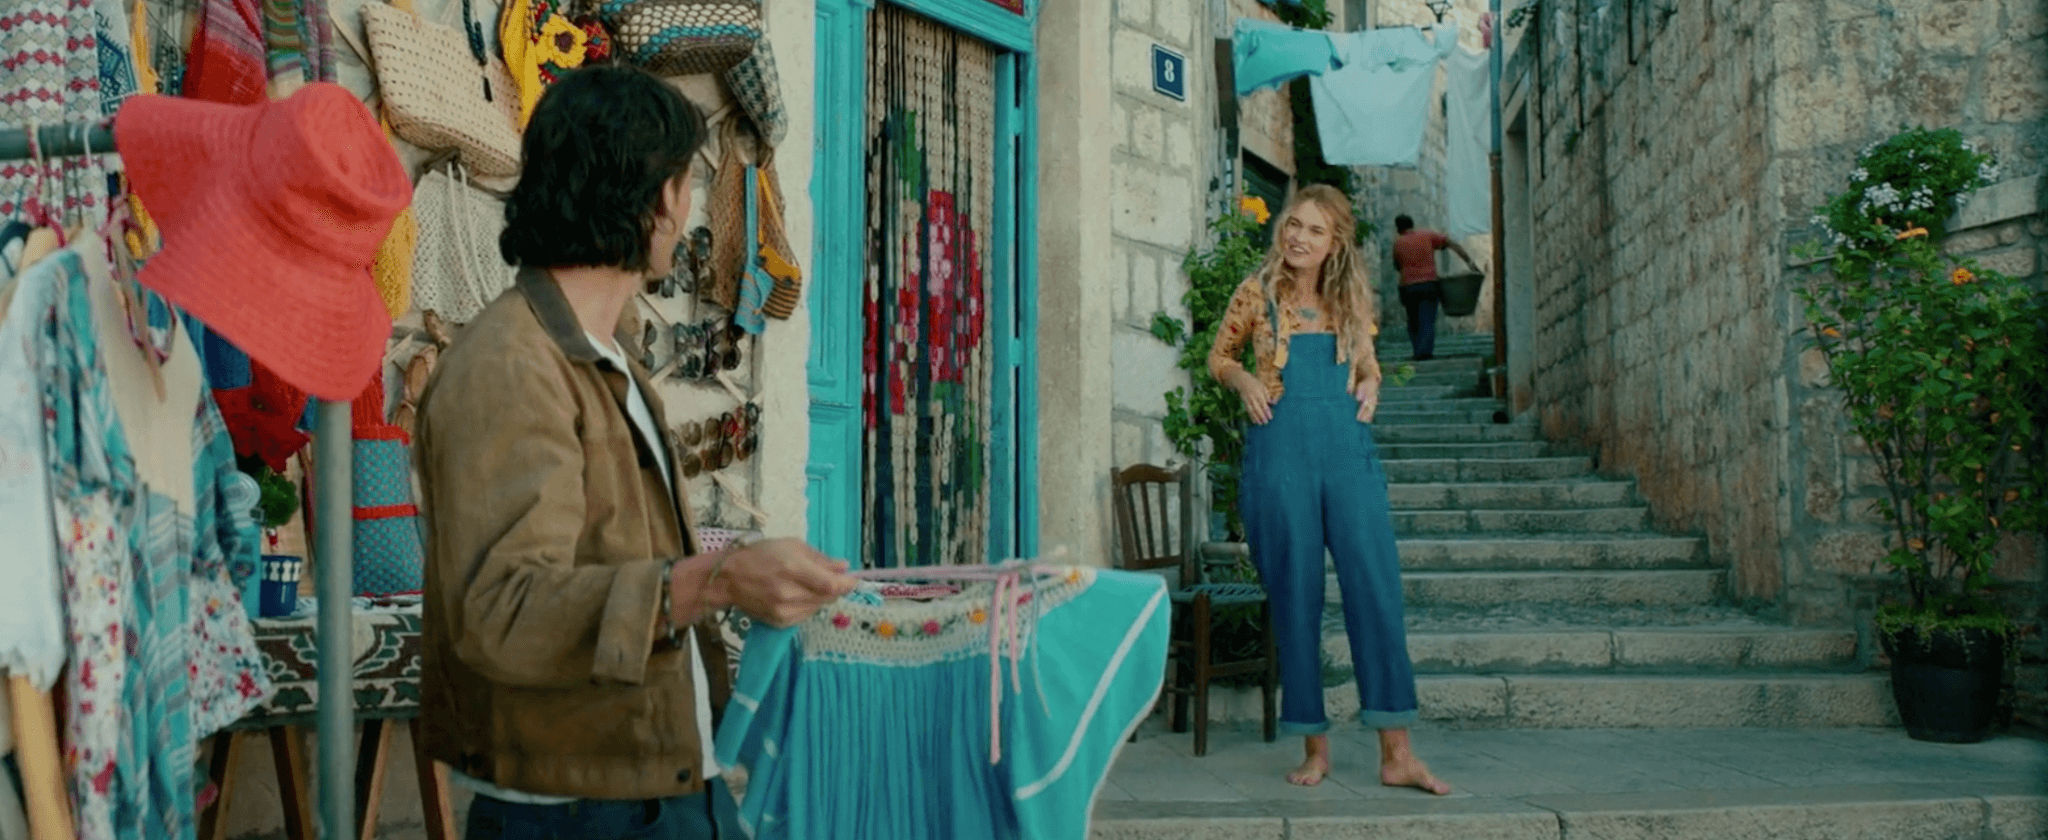 Image belongs to Universal Pictures. Young Donna outside market used in Mamma Mia II